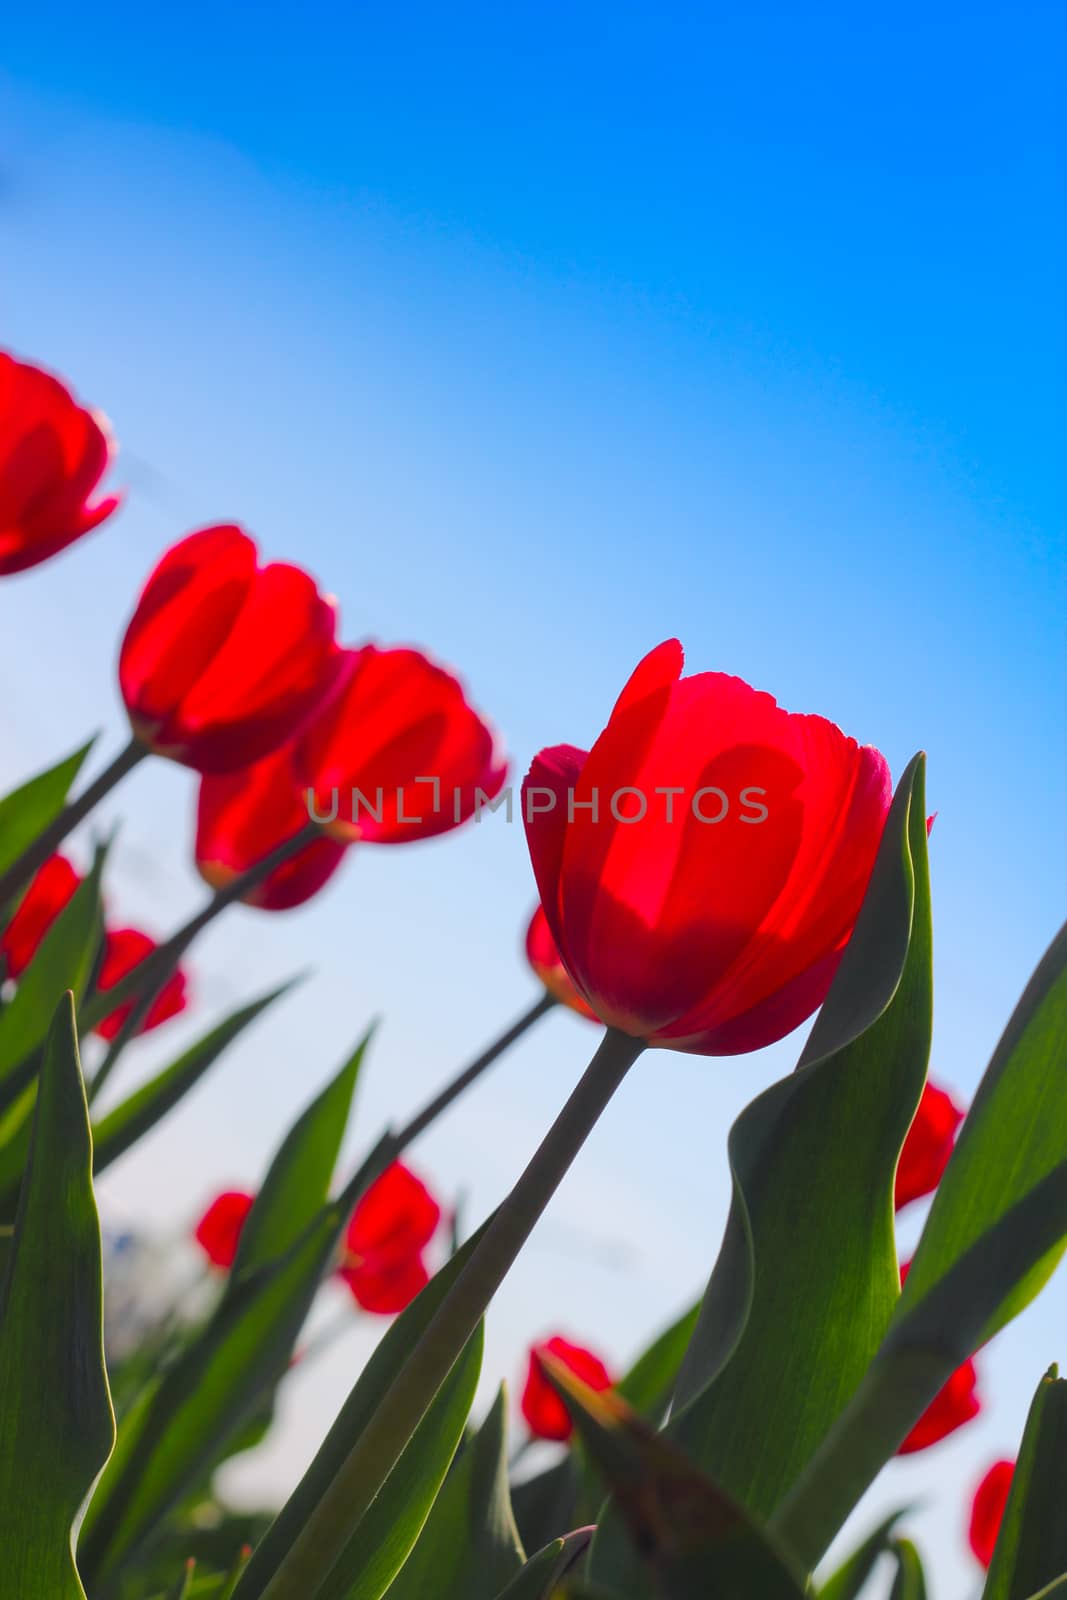 Red tulips in the garden over blue sky background